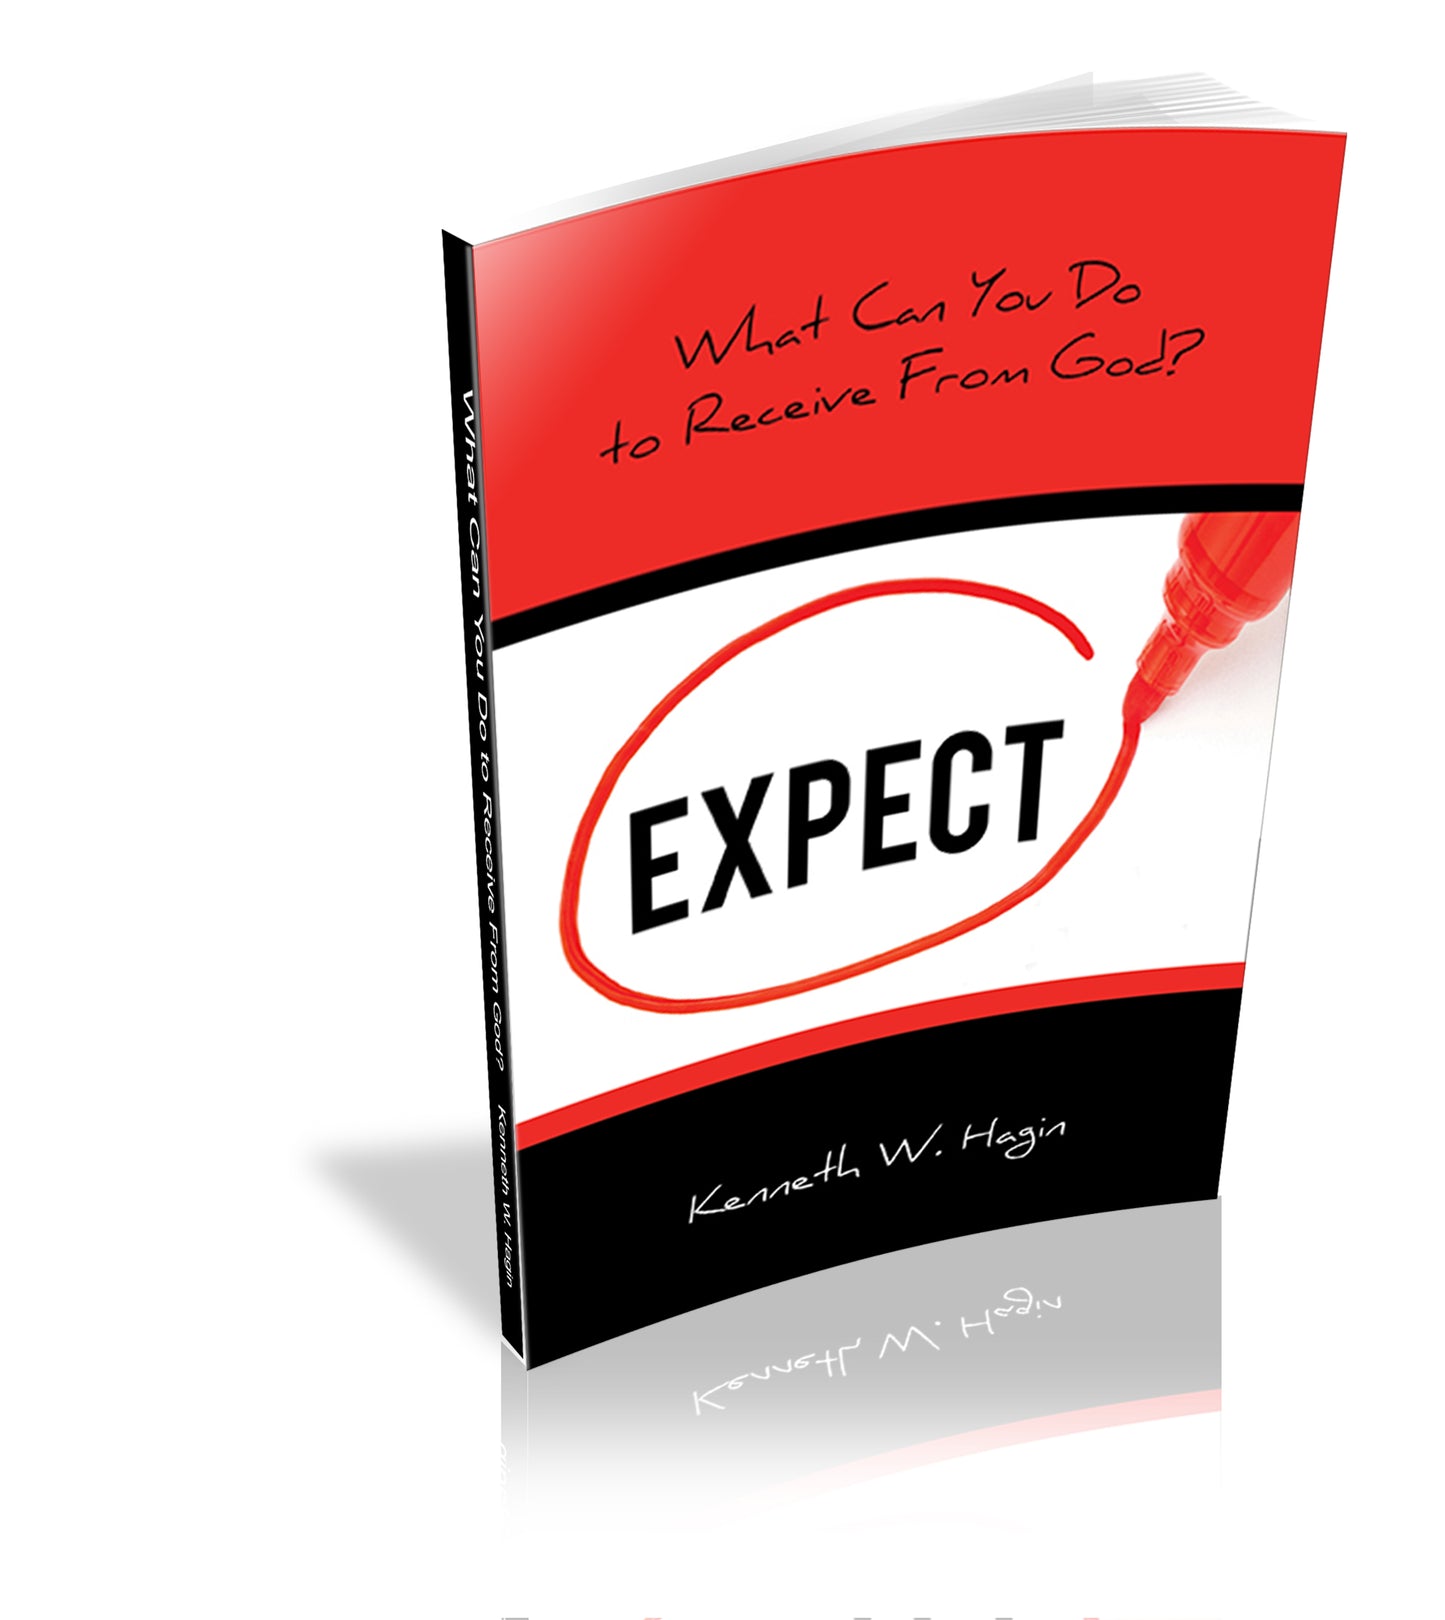 EXPECT: What Can You Do to Receive From God?